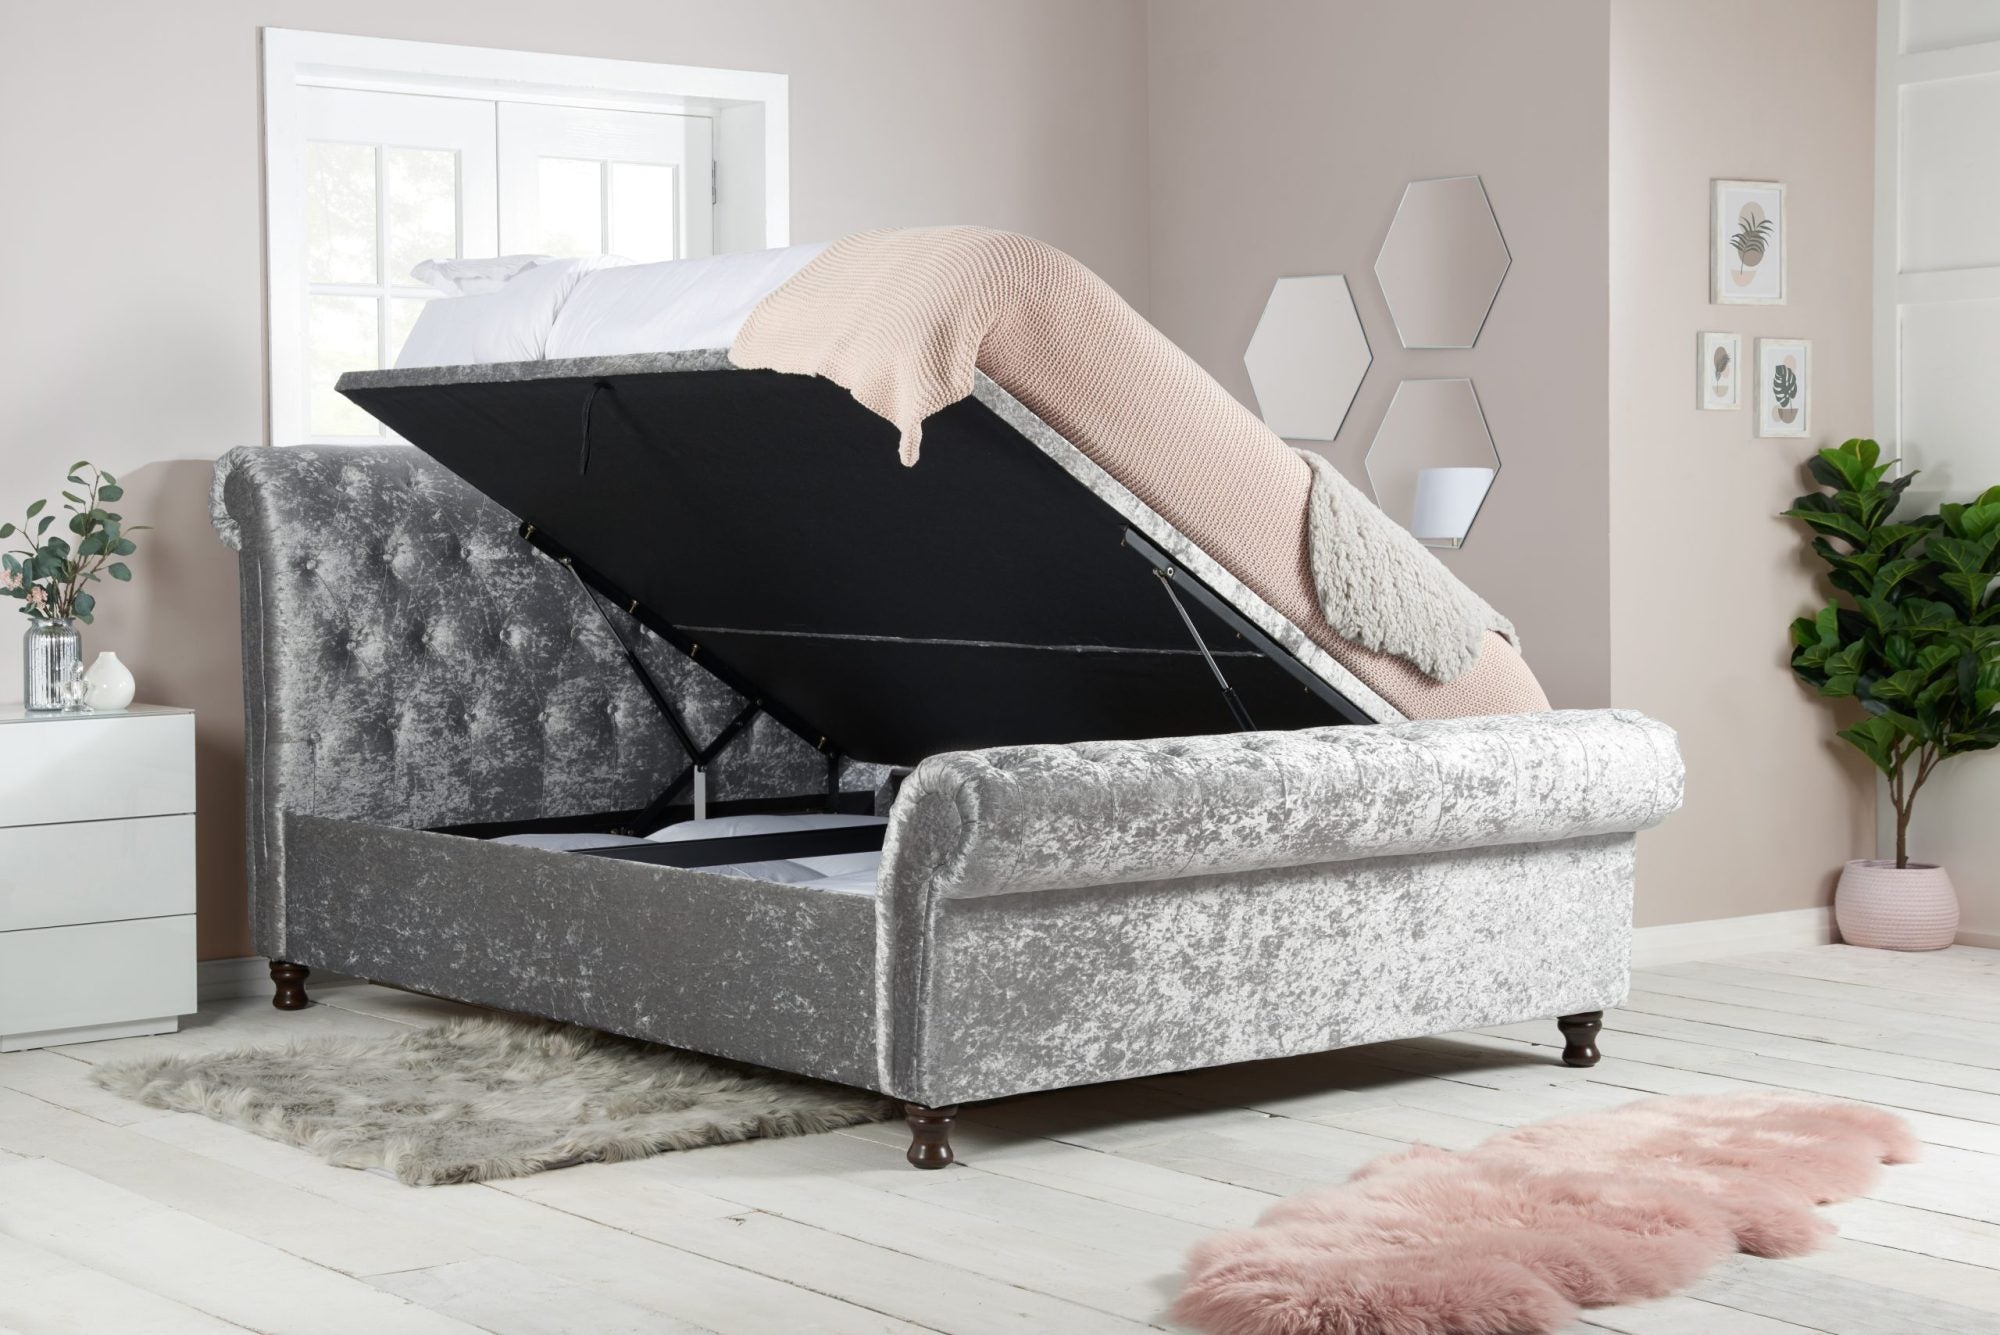 Castello King Side Ottoman Bed-1